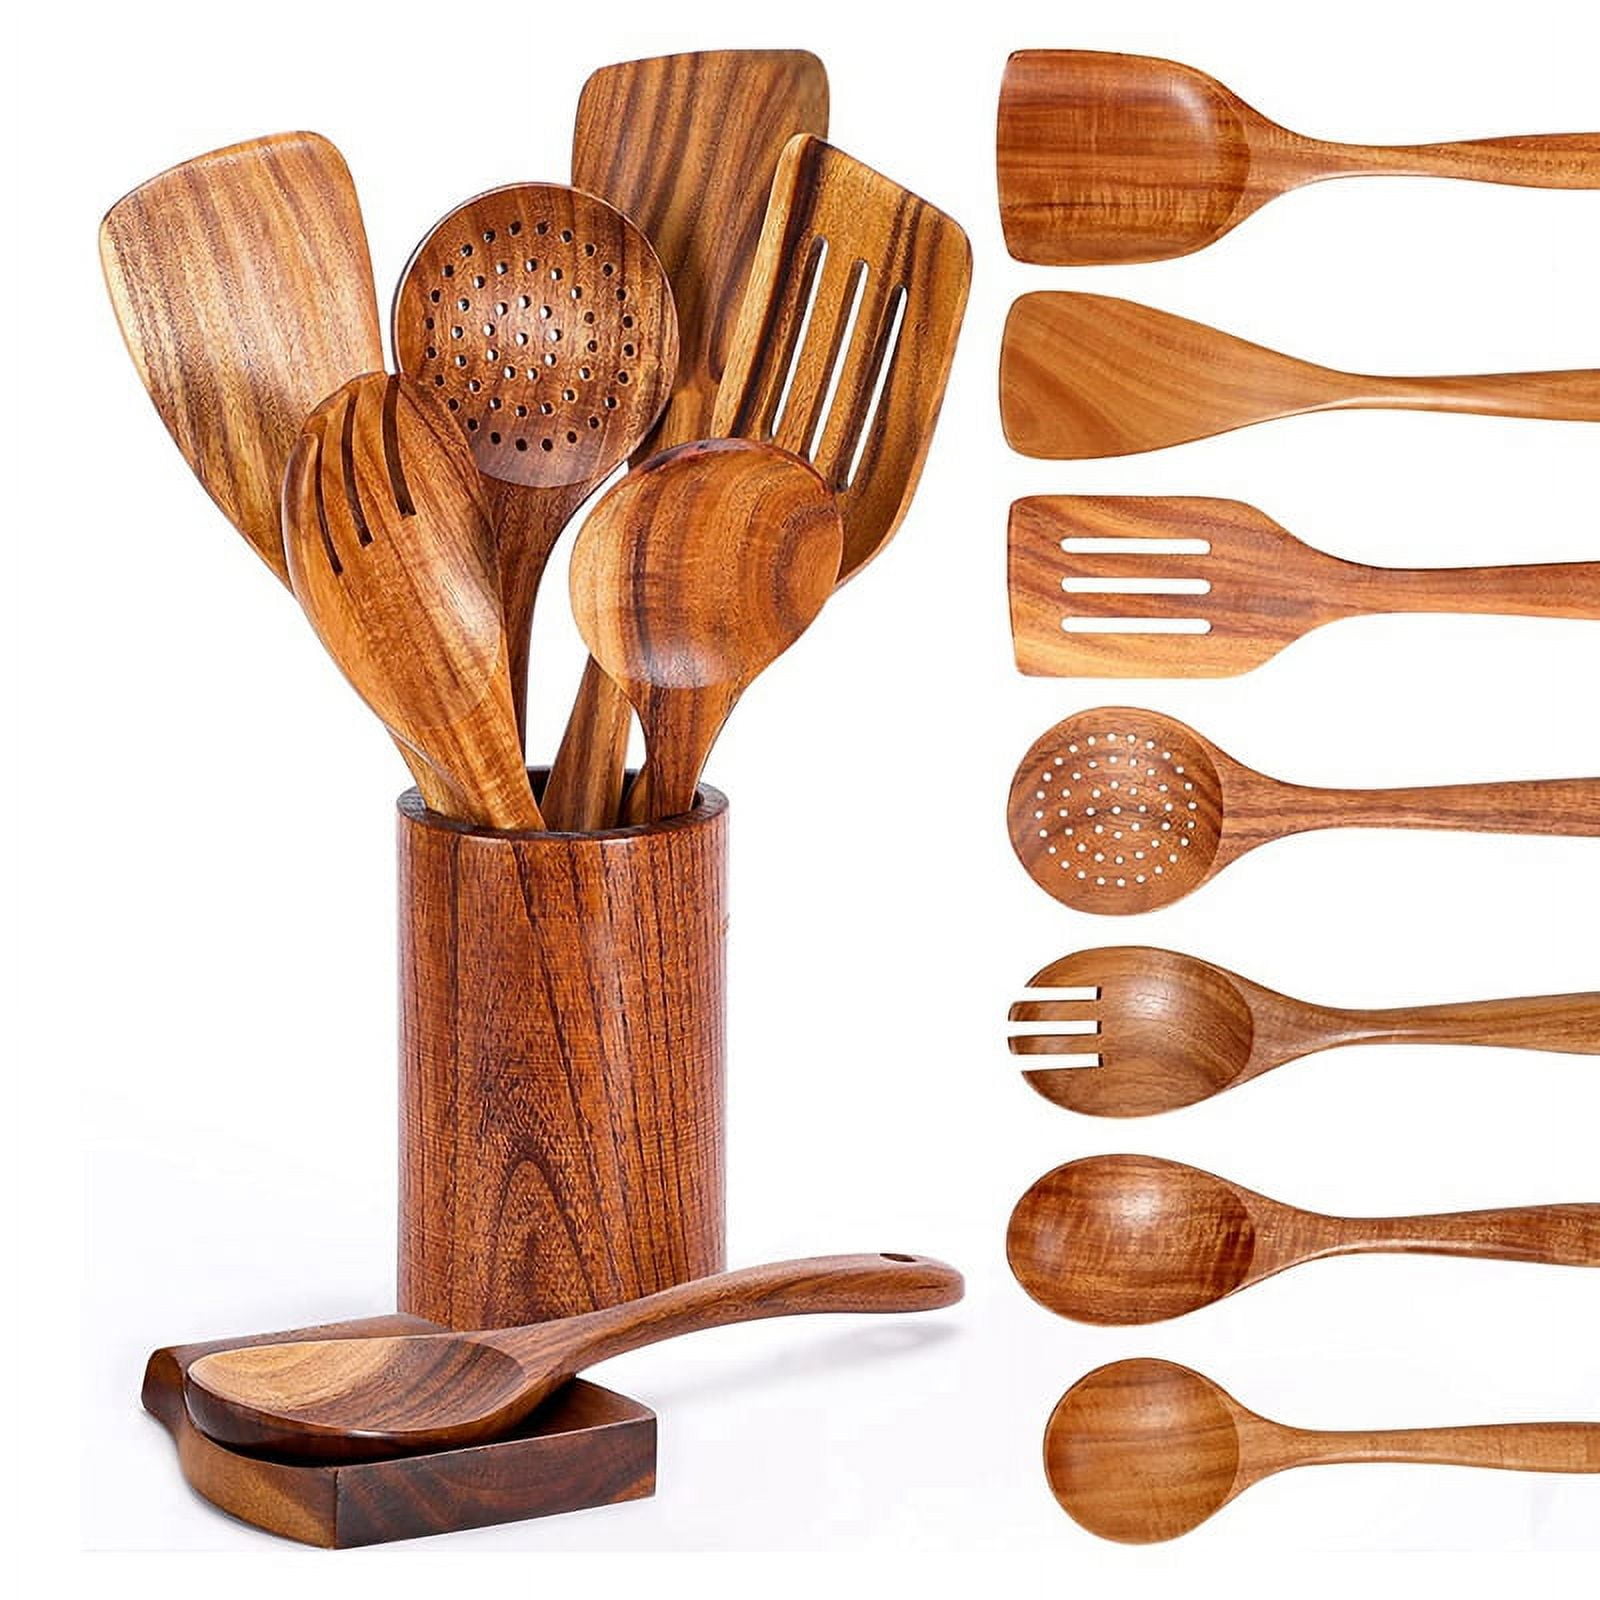 Are Wooden Spoons Safe to Cook With